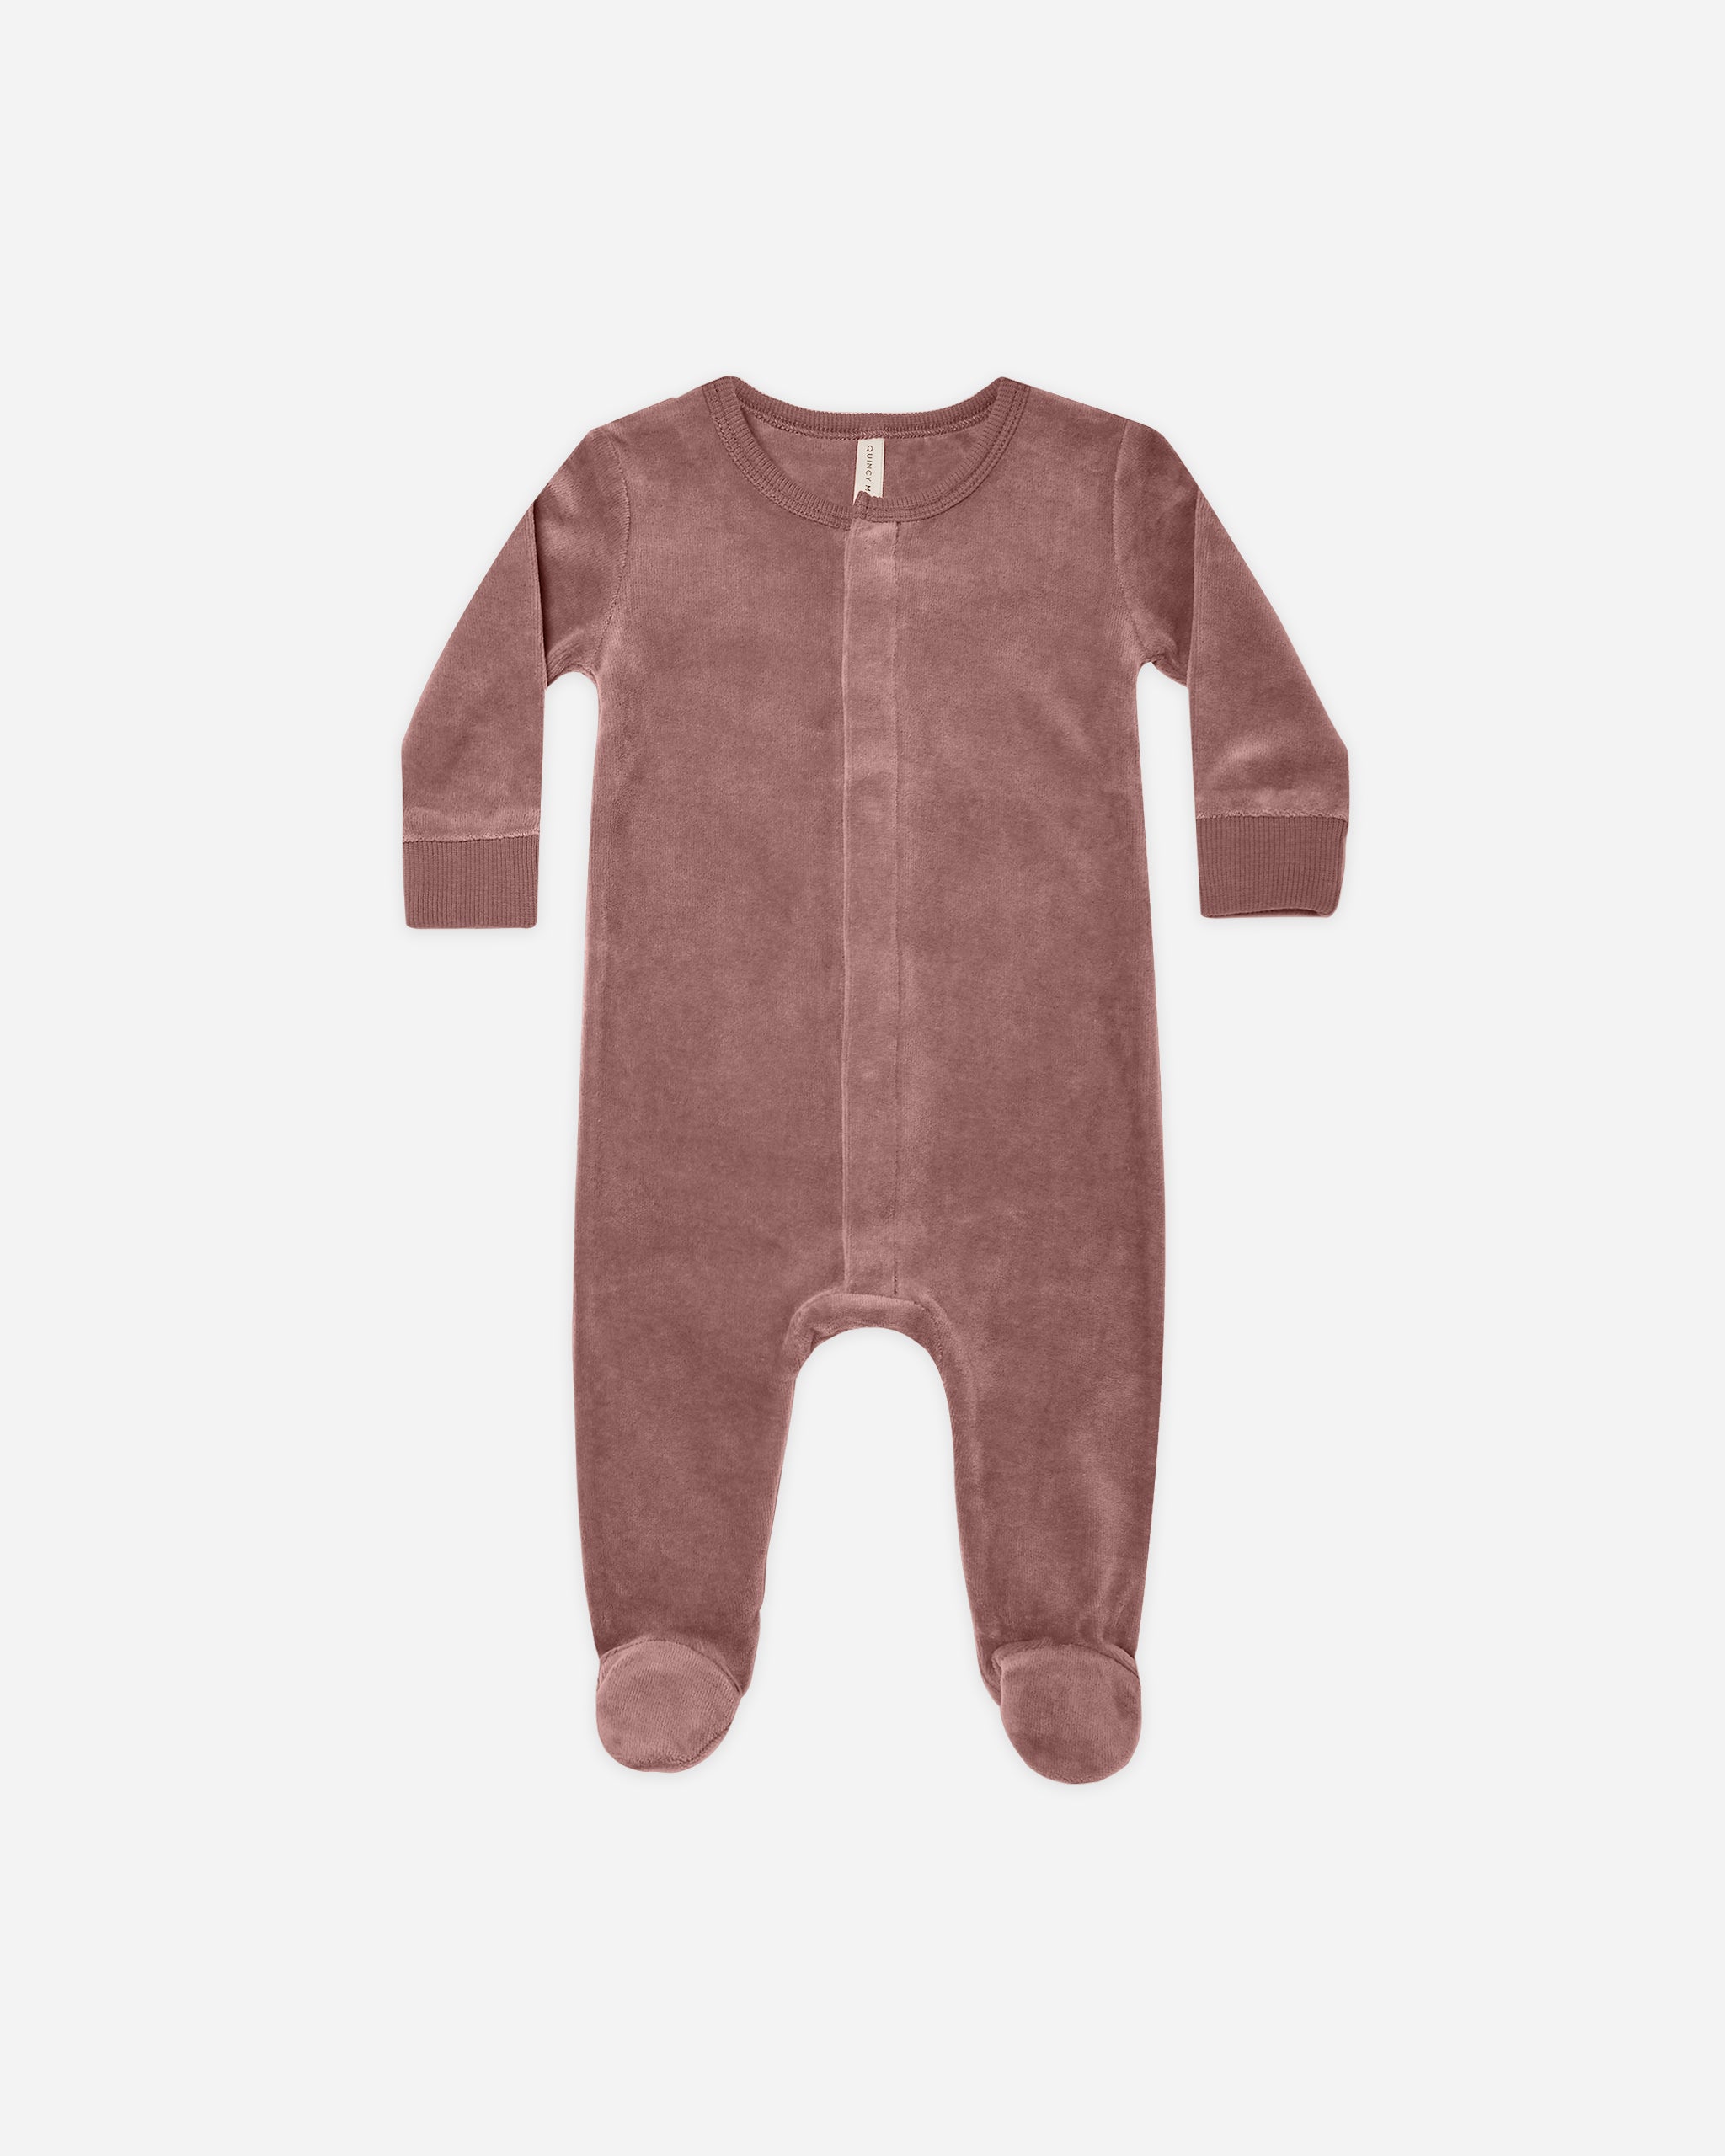 Velour Hidden Snap Footie || Fig - Rylee + Cru | Kids Clothes | Trendy Baby Clothes | Modern Infant Outfits |